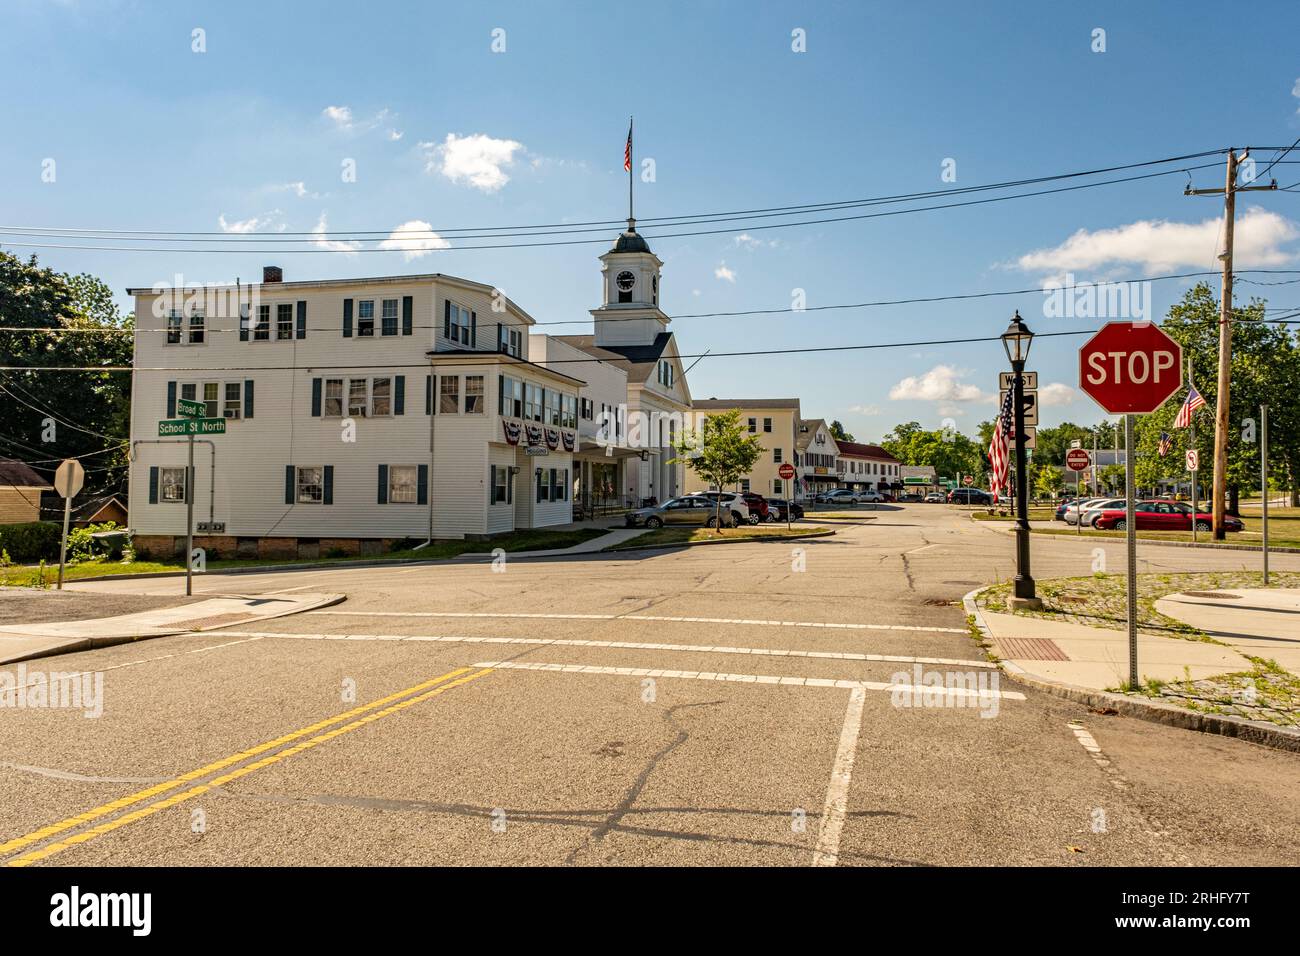 Main Street in a small rural town - Barre, MA Stock Photo